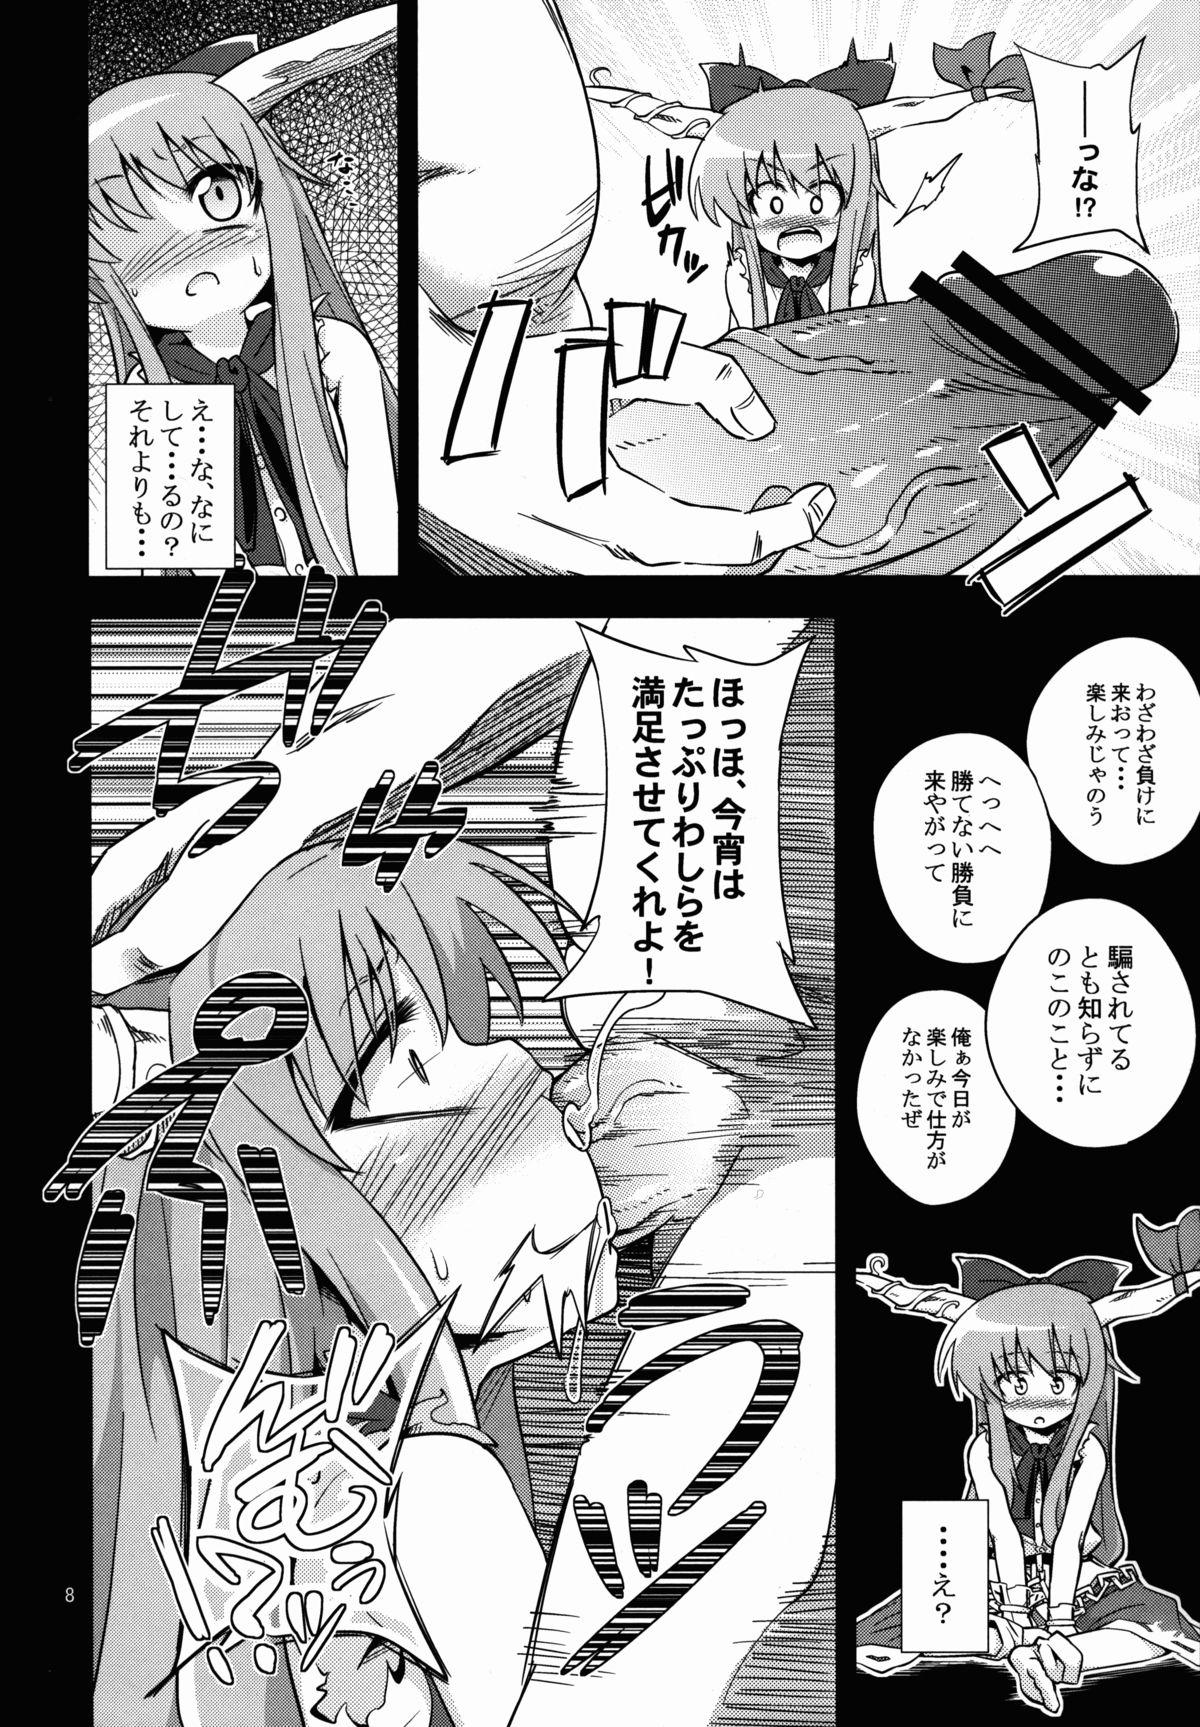 Upskirt 鬼犯嘘犯喜 - Touhou project Cocksuckers - Page 8